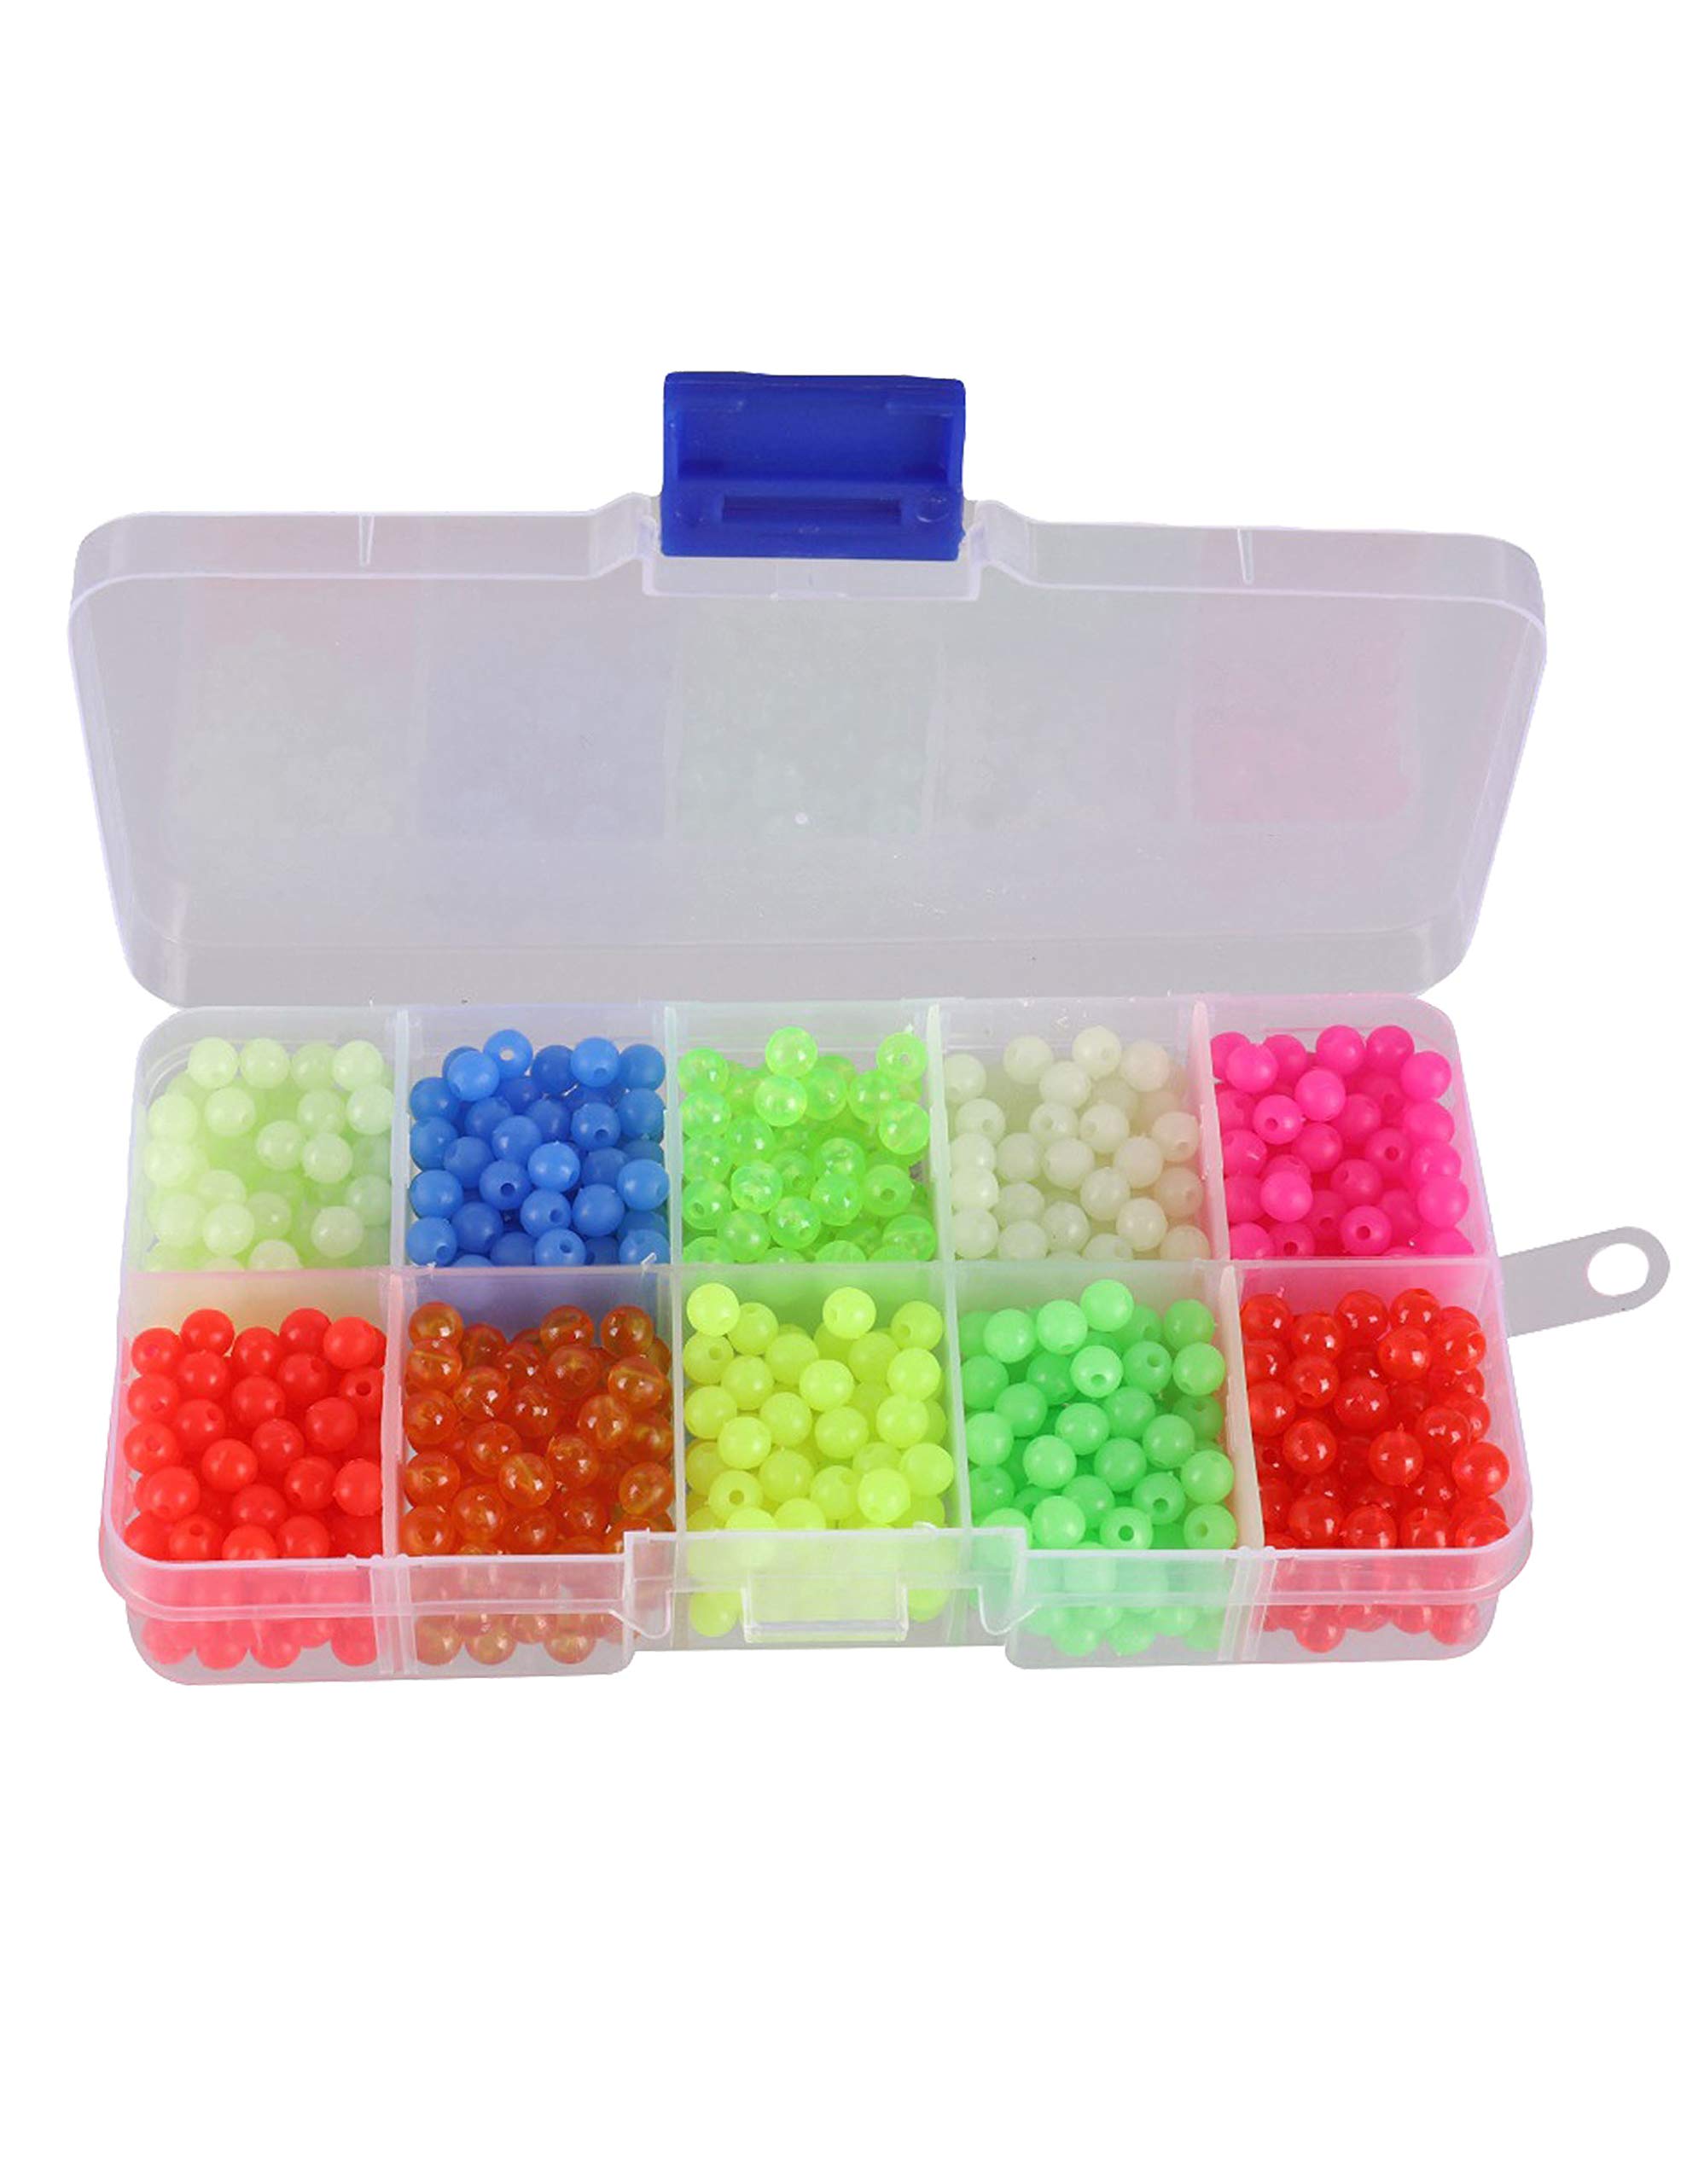 Buy Calandis 100 pcs 7x10mm Luminous Fishing Bead Fishing Tackle Fishing  Equipment Online In India At Discounted Prices